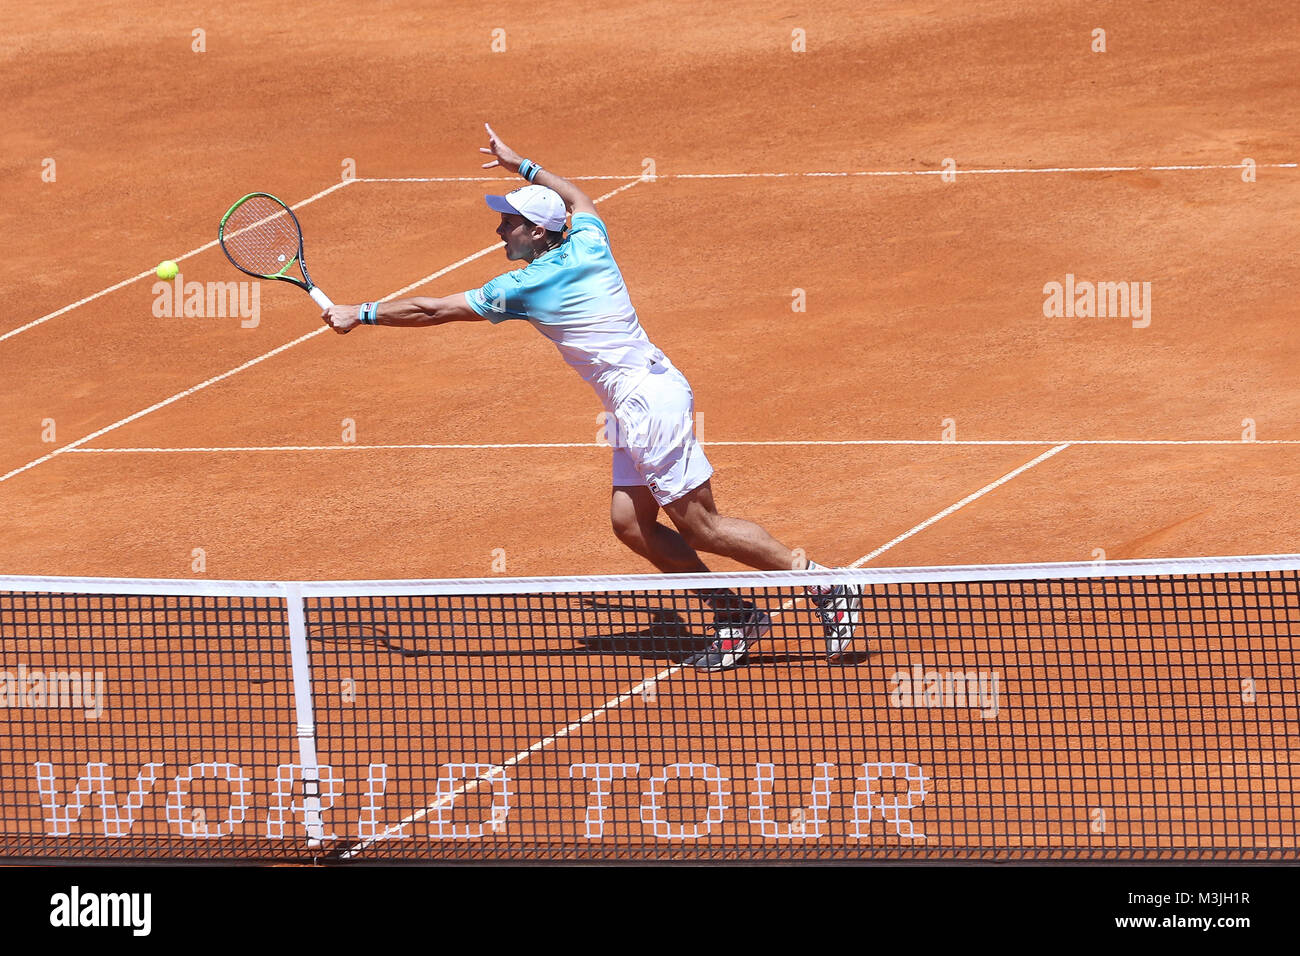 Buenos Aires, Argentina. 11th February, 2018. Facundo Bagnis during the match to access to main draw of Buenos Aires ATP 250 this sunday on central court of Buenos Aires Lawn Tennis, Argentina. Credit: Néstor J. Beremblum/Alamy Live News Stock Photo